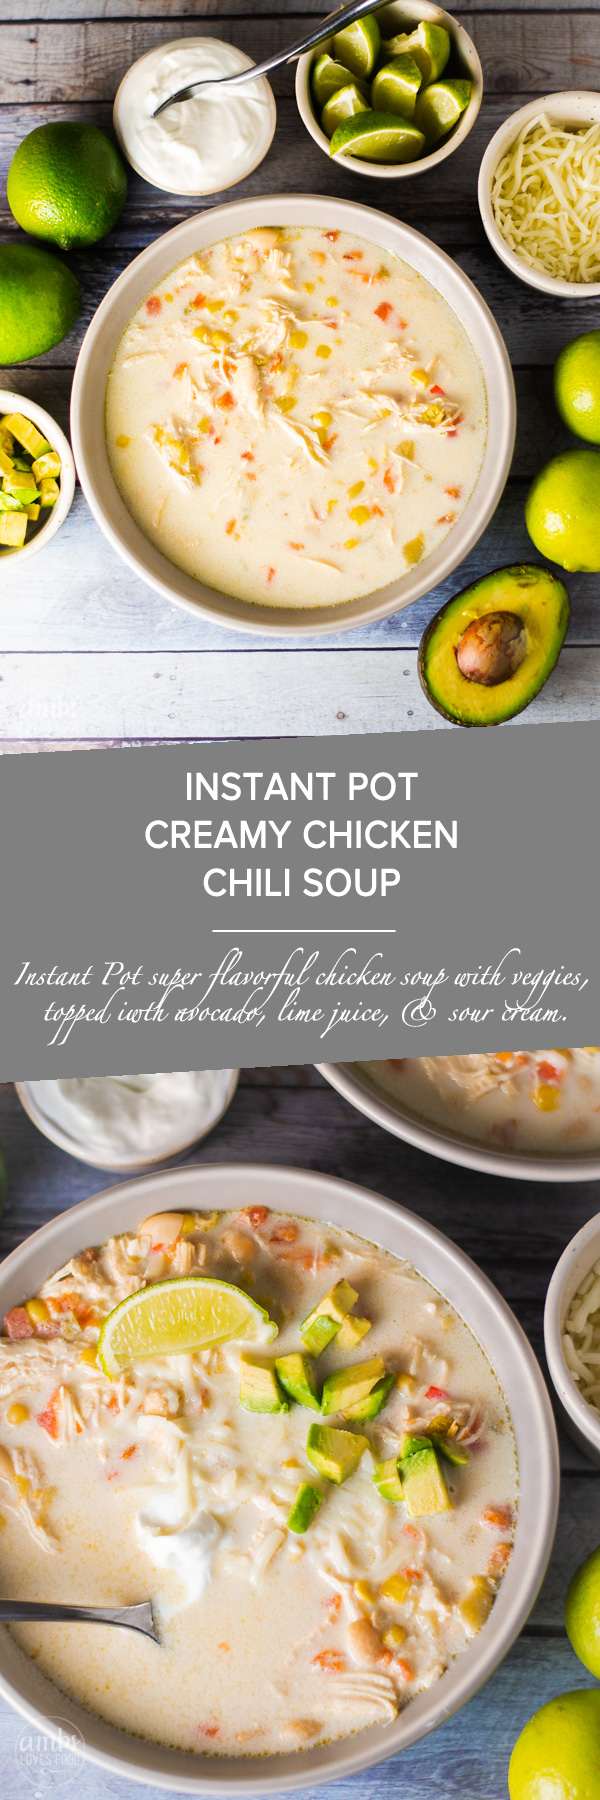 INSTANT POT CREAMY CHICKEN CHILI SOUP – AMBS LOVES FOOD